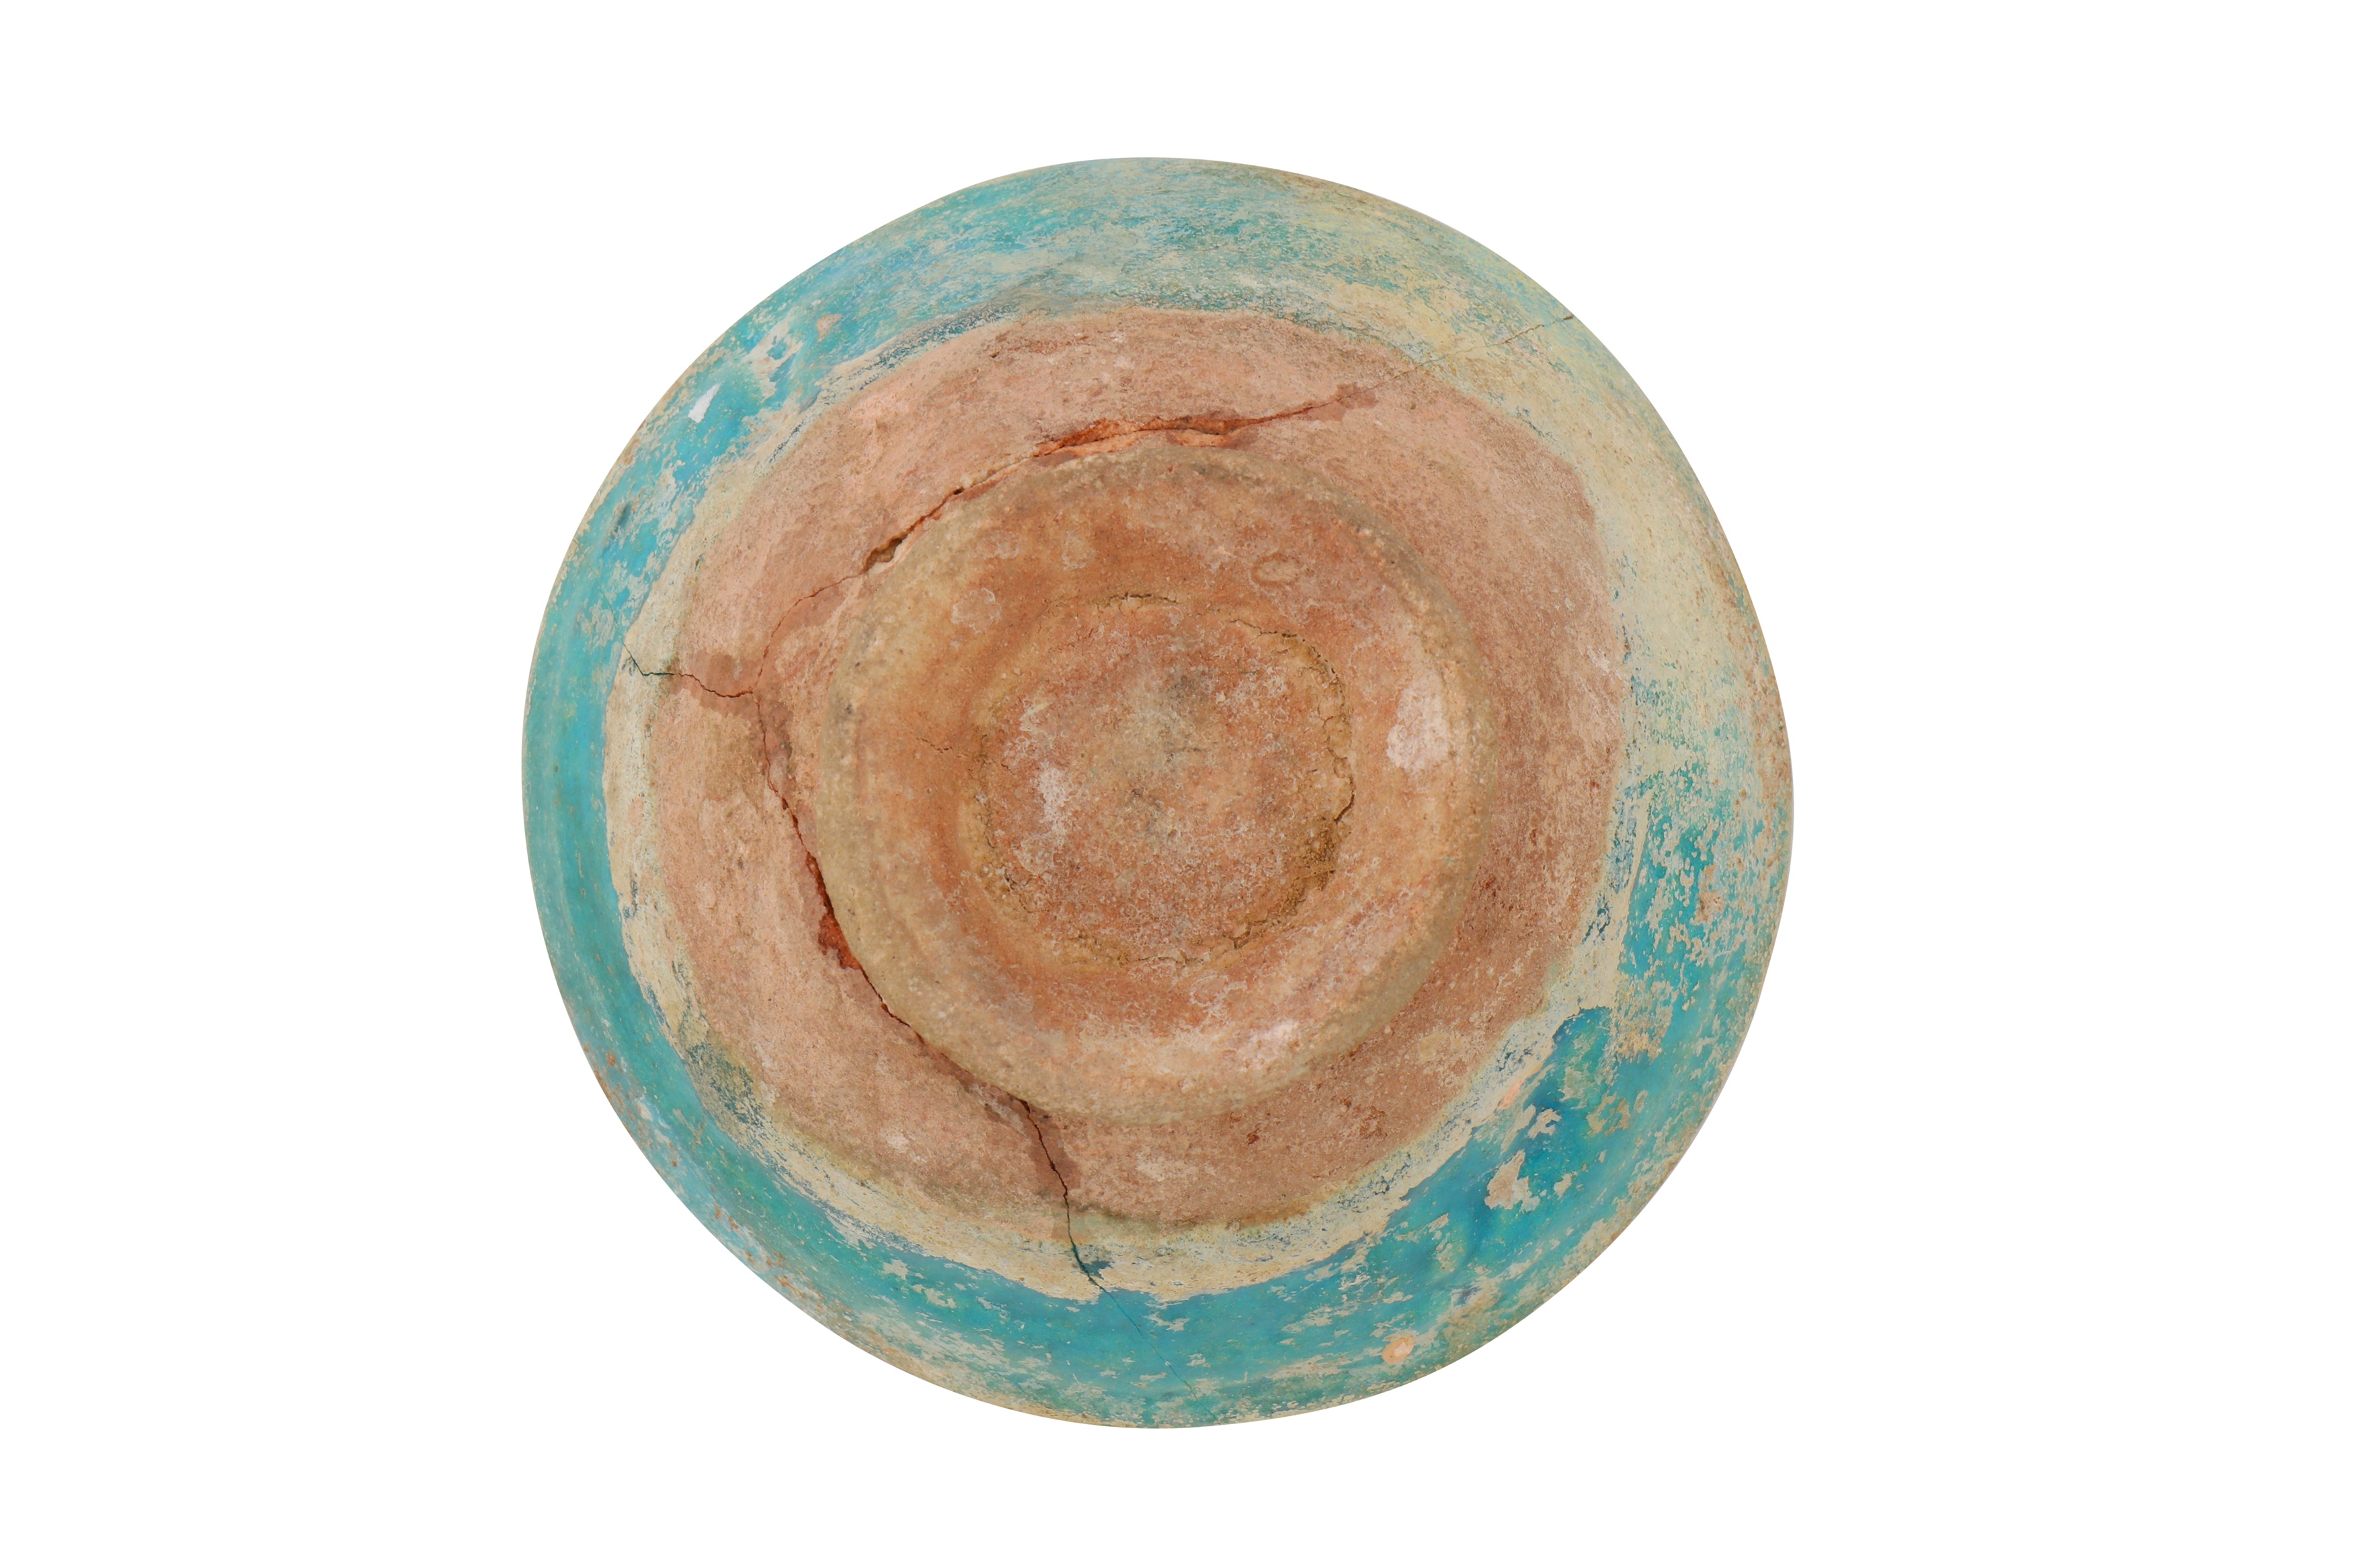 A 12TH-13TH CENTURY PERSIAN KASHAN TURQUOISE GLAZED POTTERY BOWL - Image 4 of 4